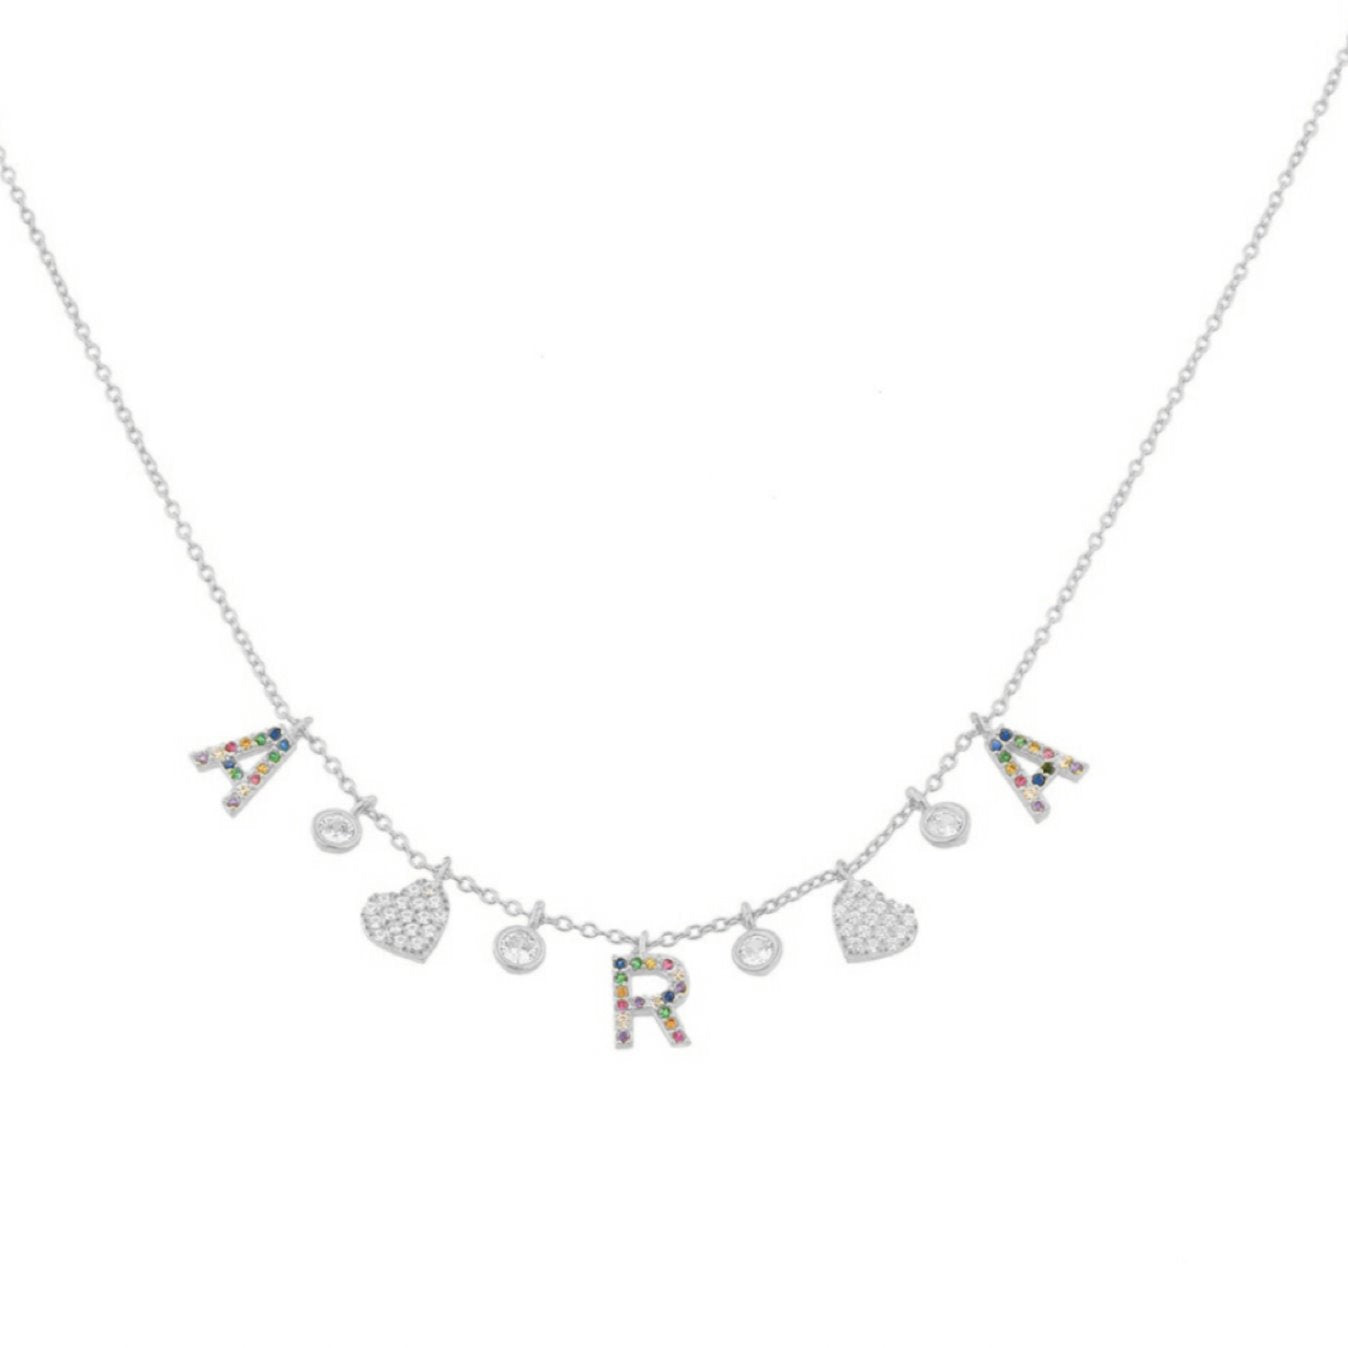 It’s All in a Name™ Personalized Necklace JEWELRY The Sis Kiss Rainbow Crystals with Silver Chain